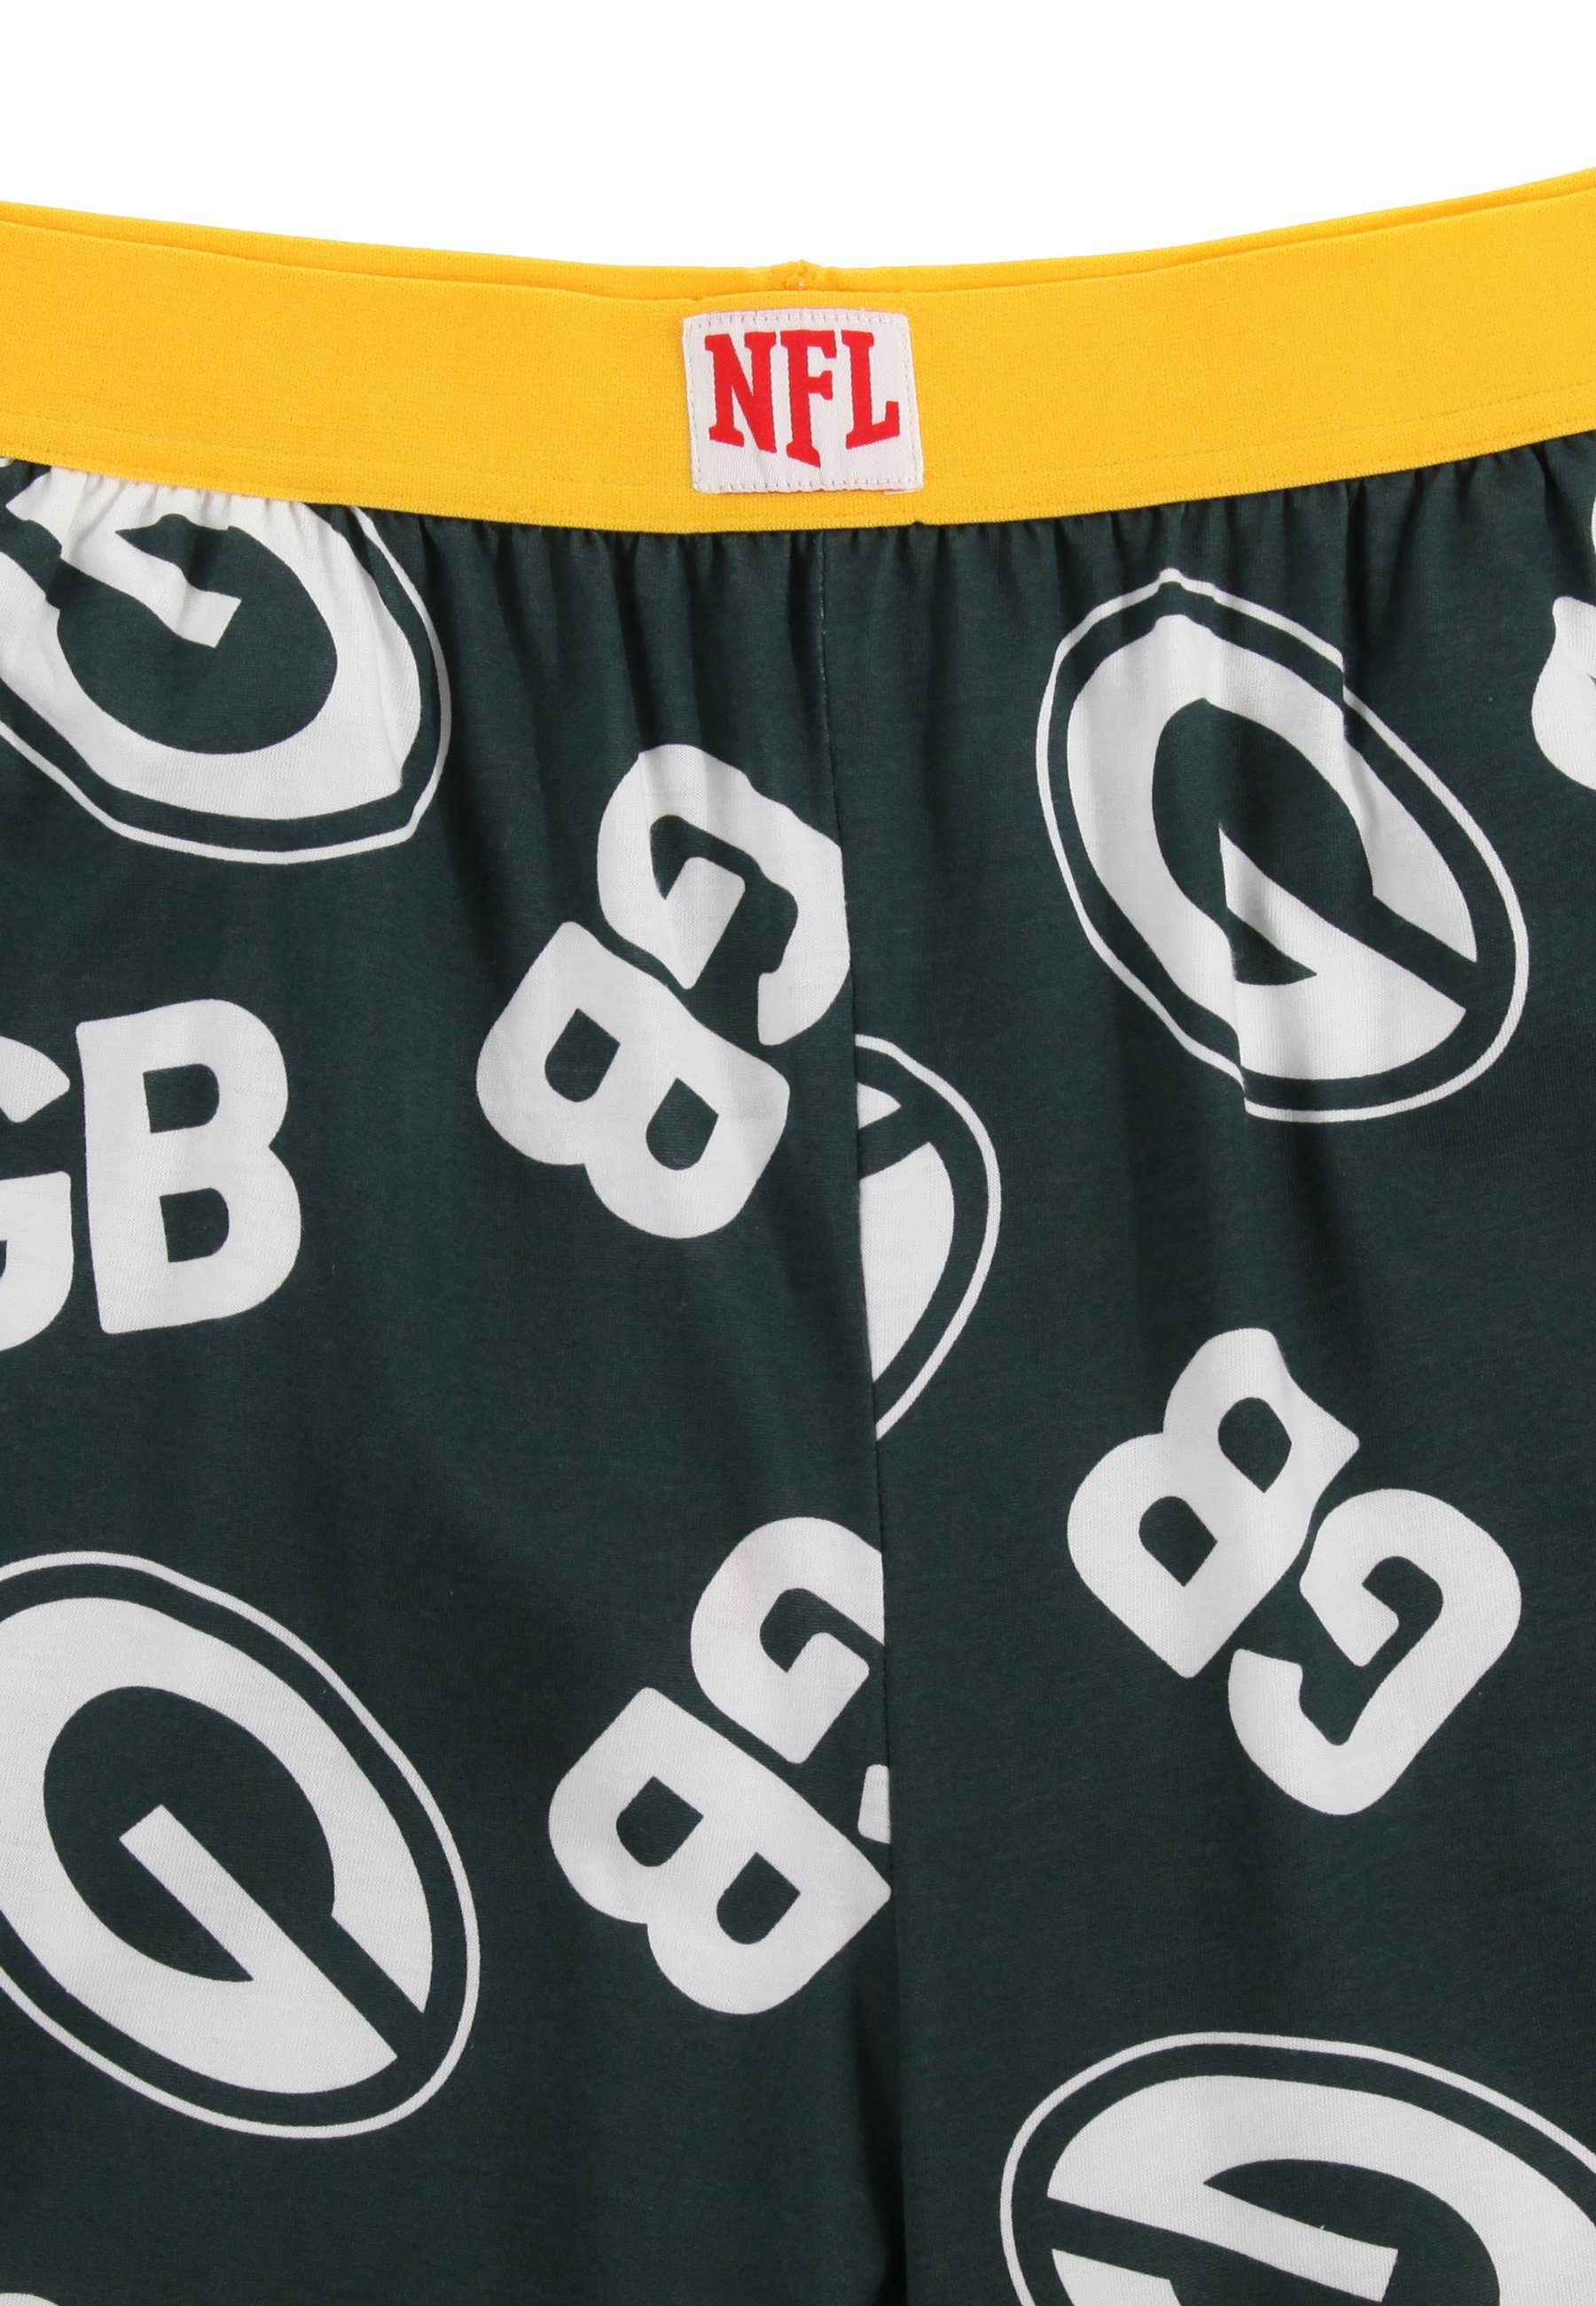 Recovered Loungepants â€“ Green Green Bay Recovered NFL GB Loungepants Packers